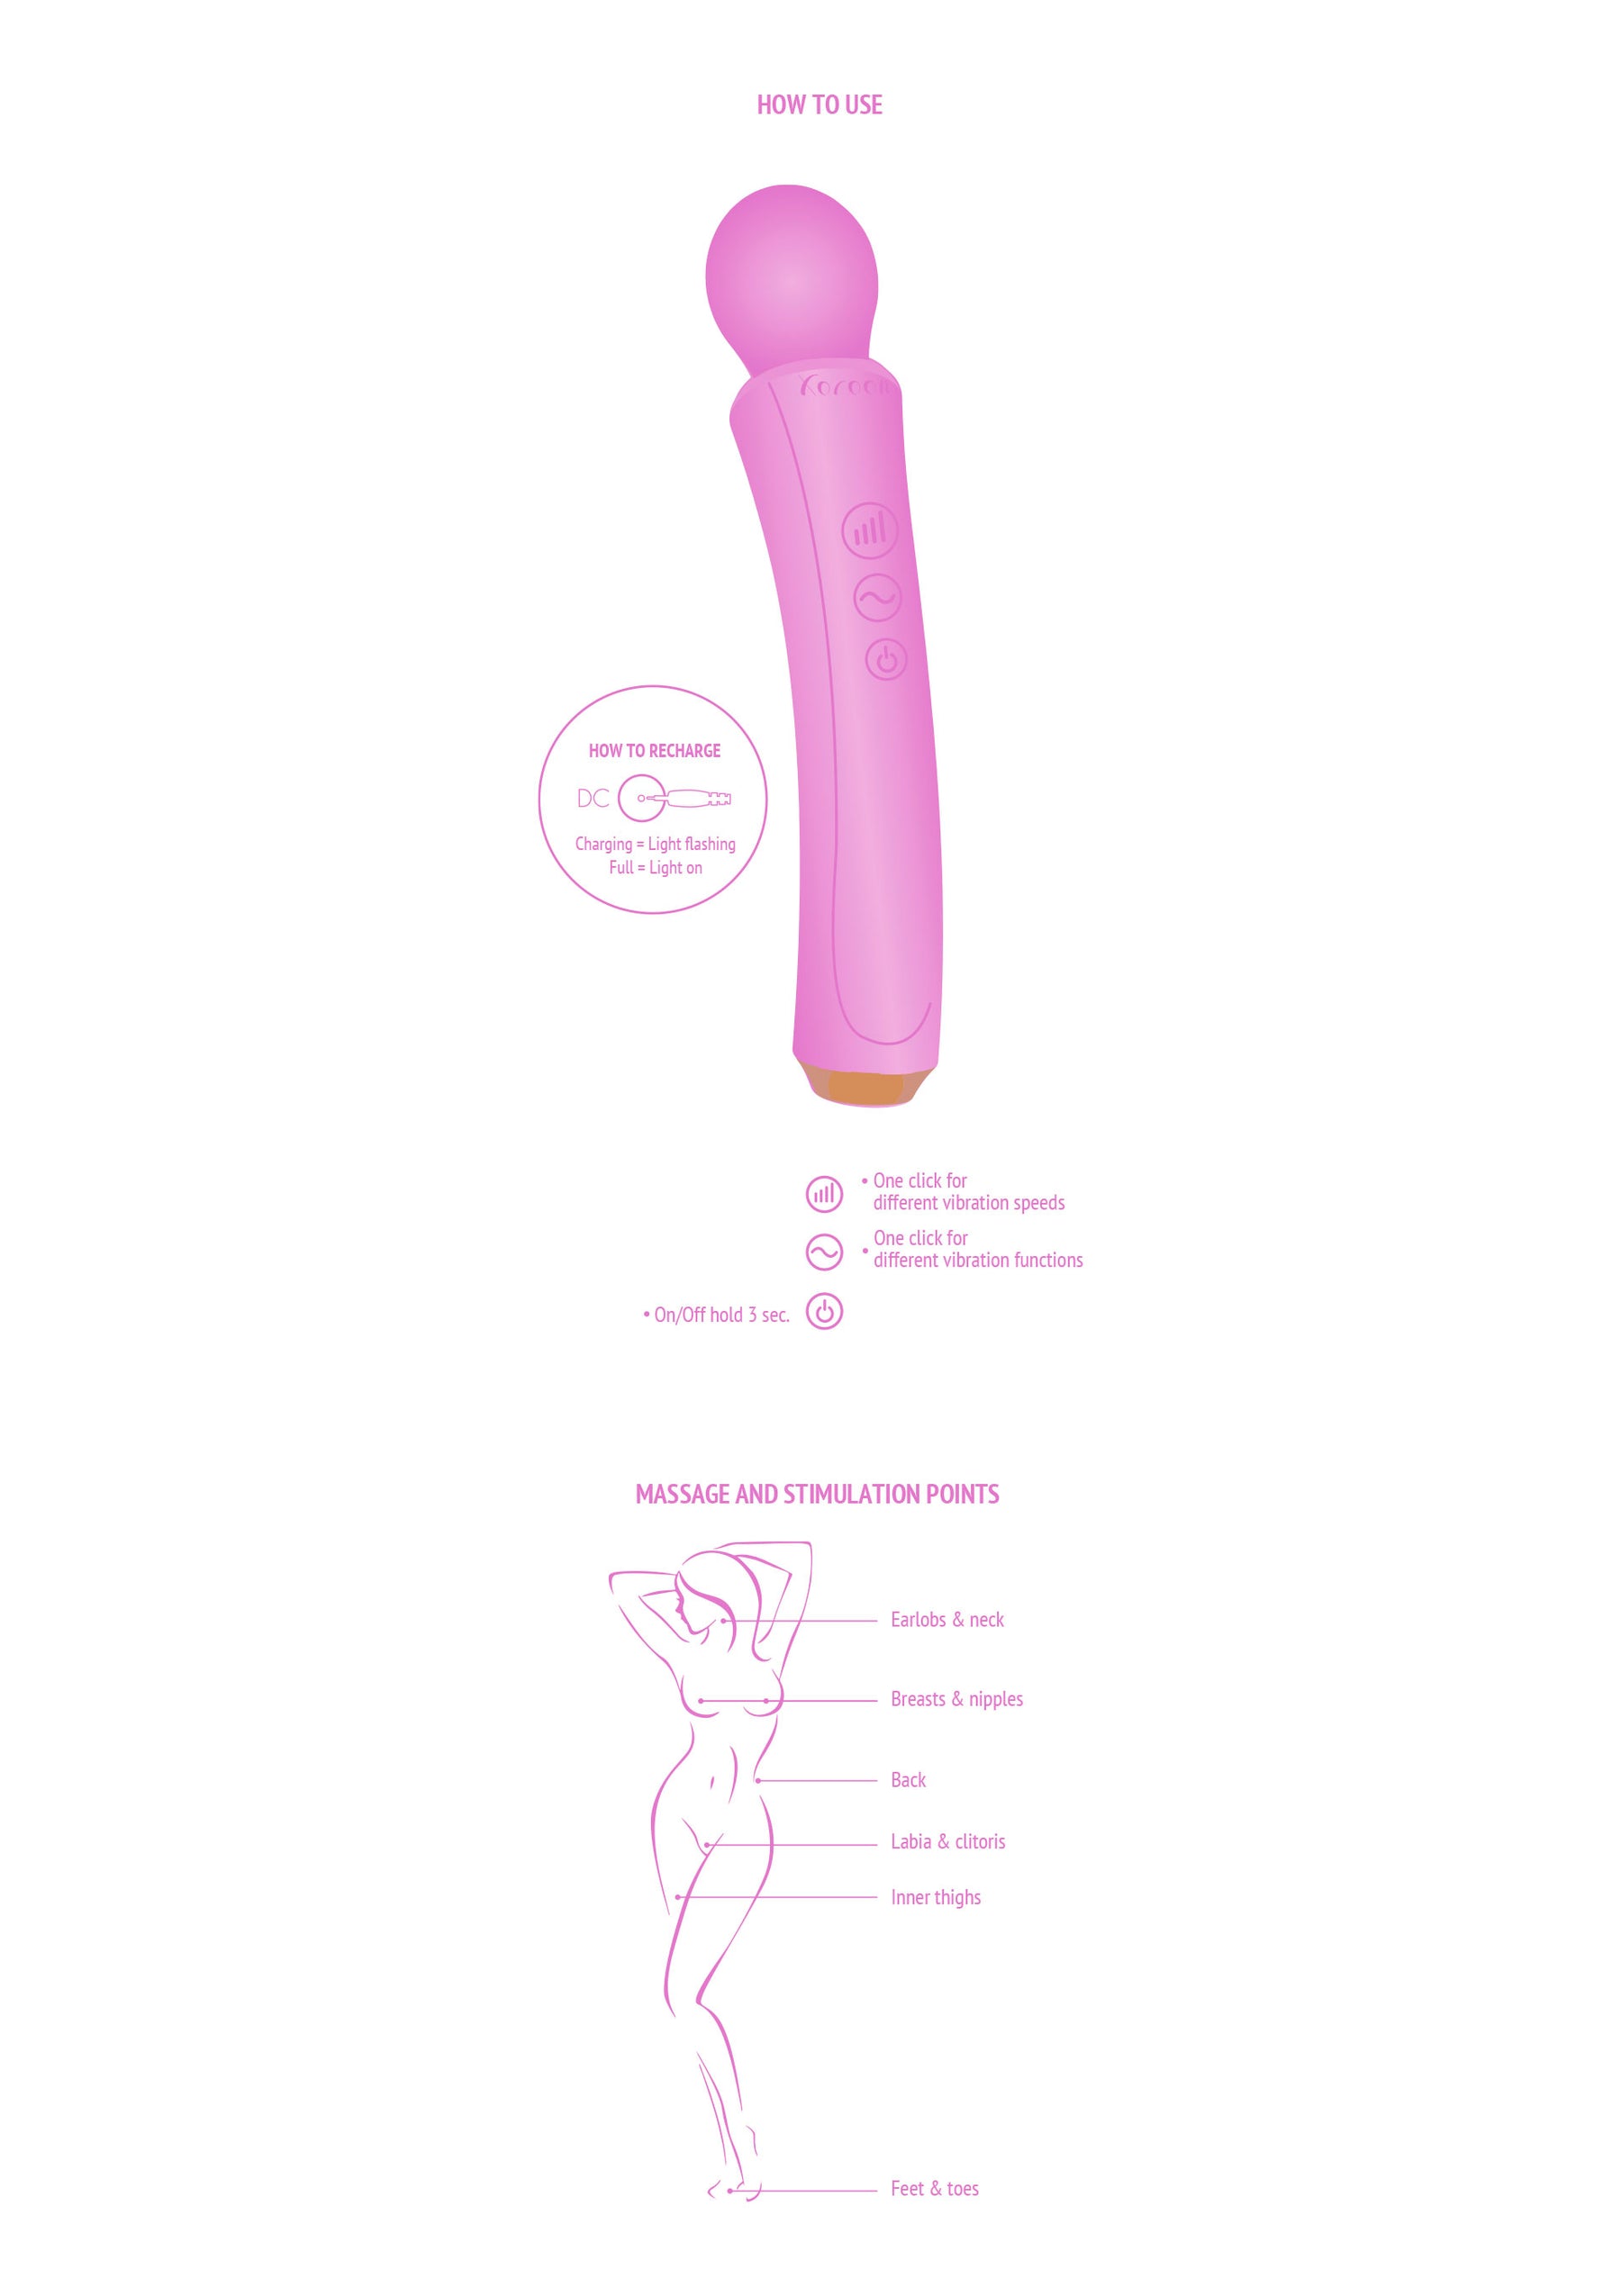 The Curved Wand